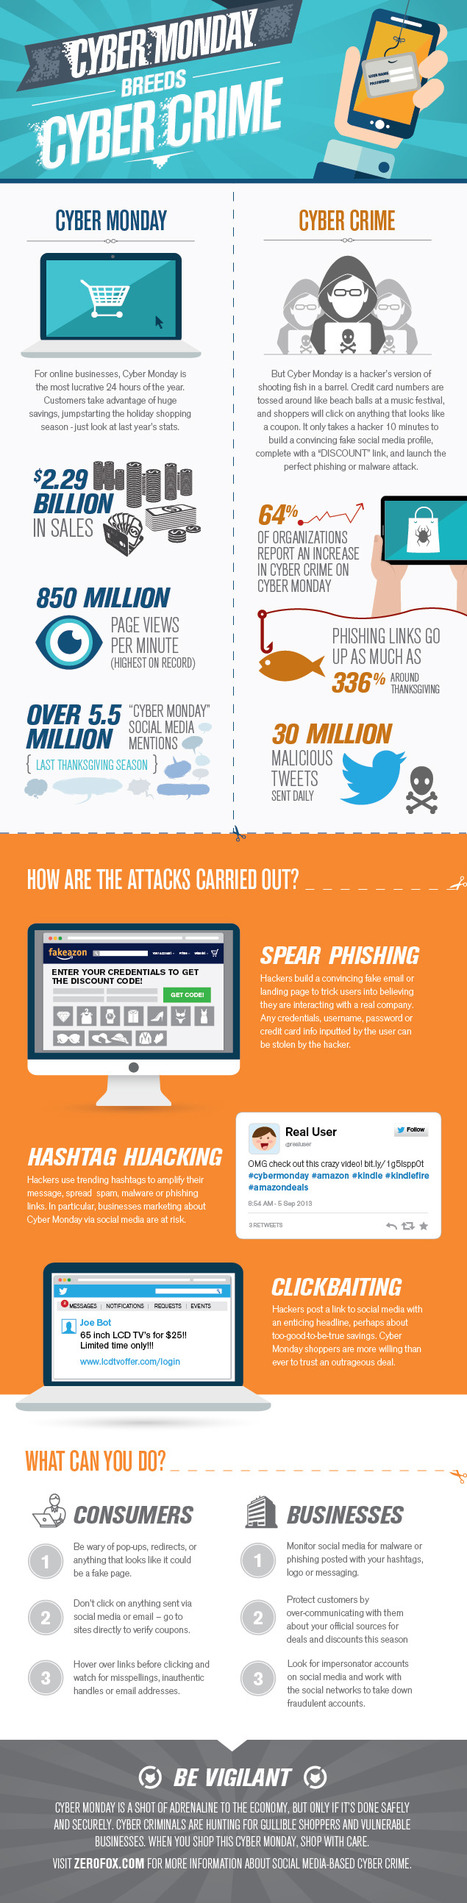 How hackers are stealing this Cyber Monday (Infographic) | CyberSecurity | Phishing | Education 2.0 & 3.0 | Scoop.it